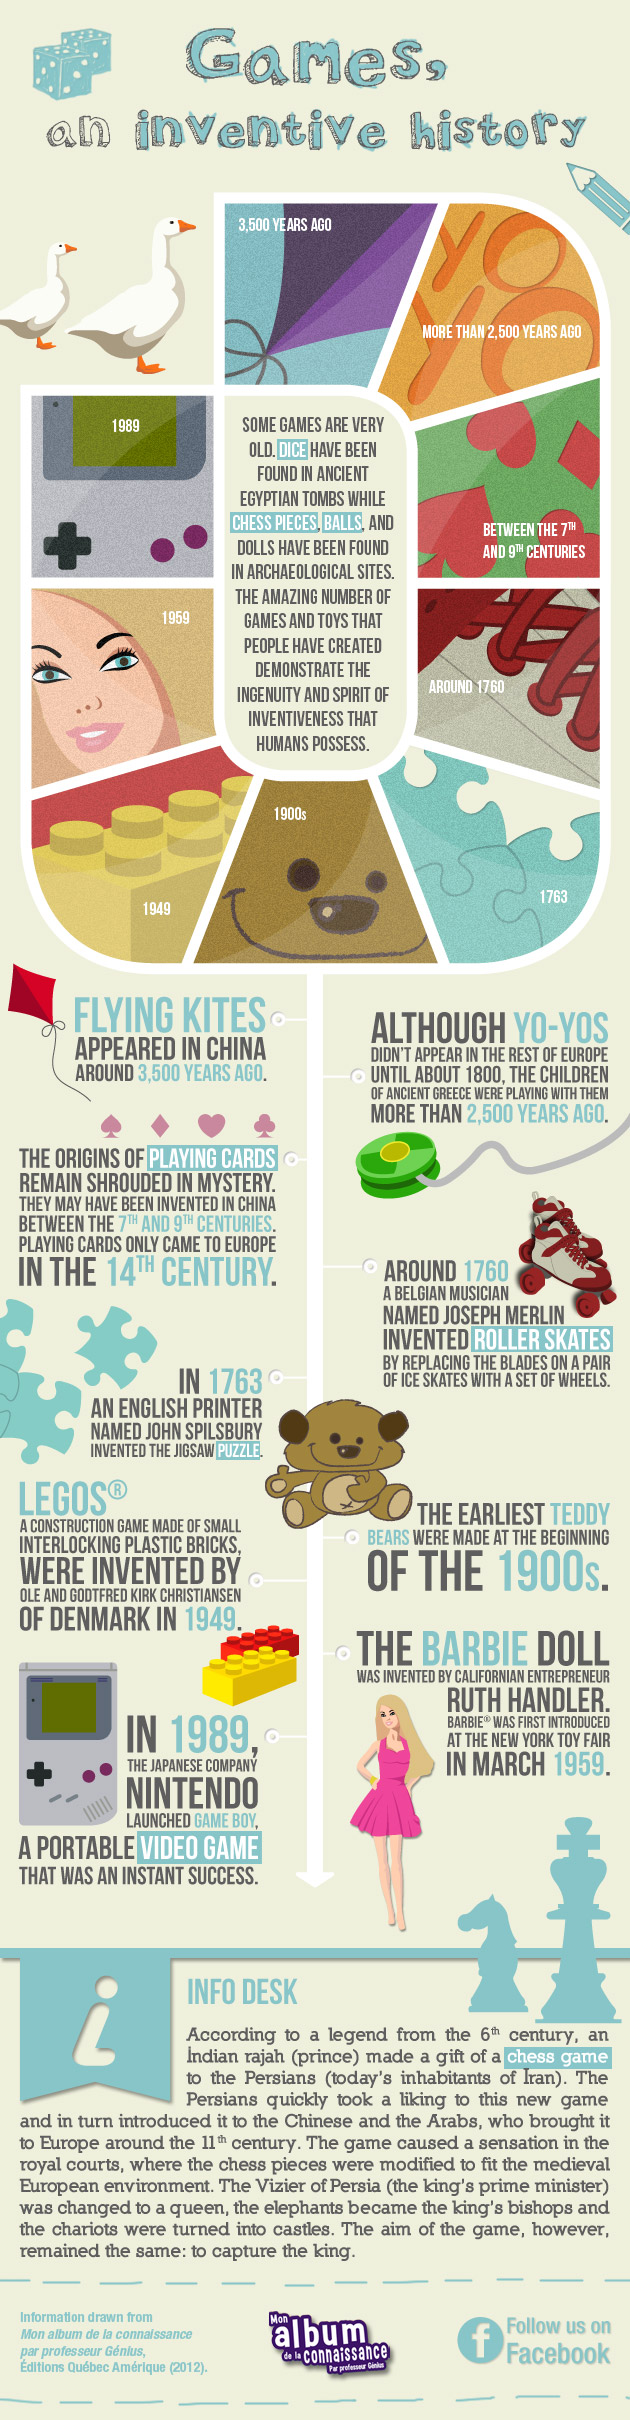 Infographic: Games, an inventive history